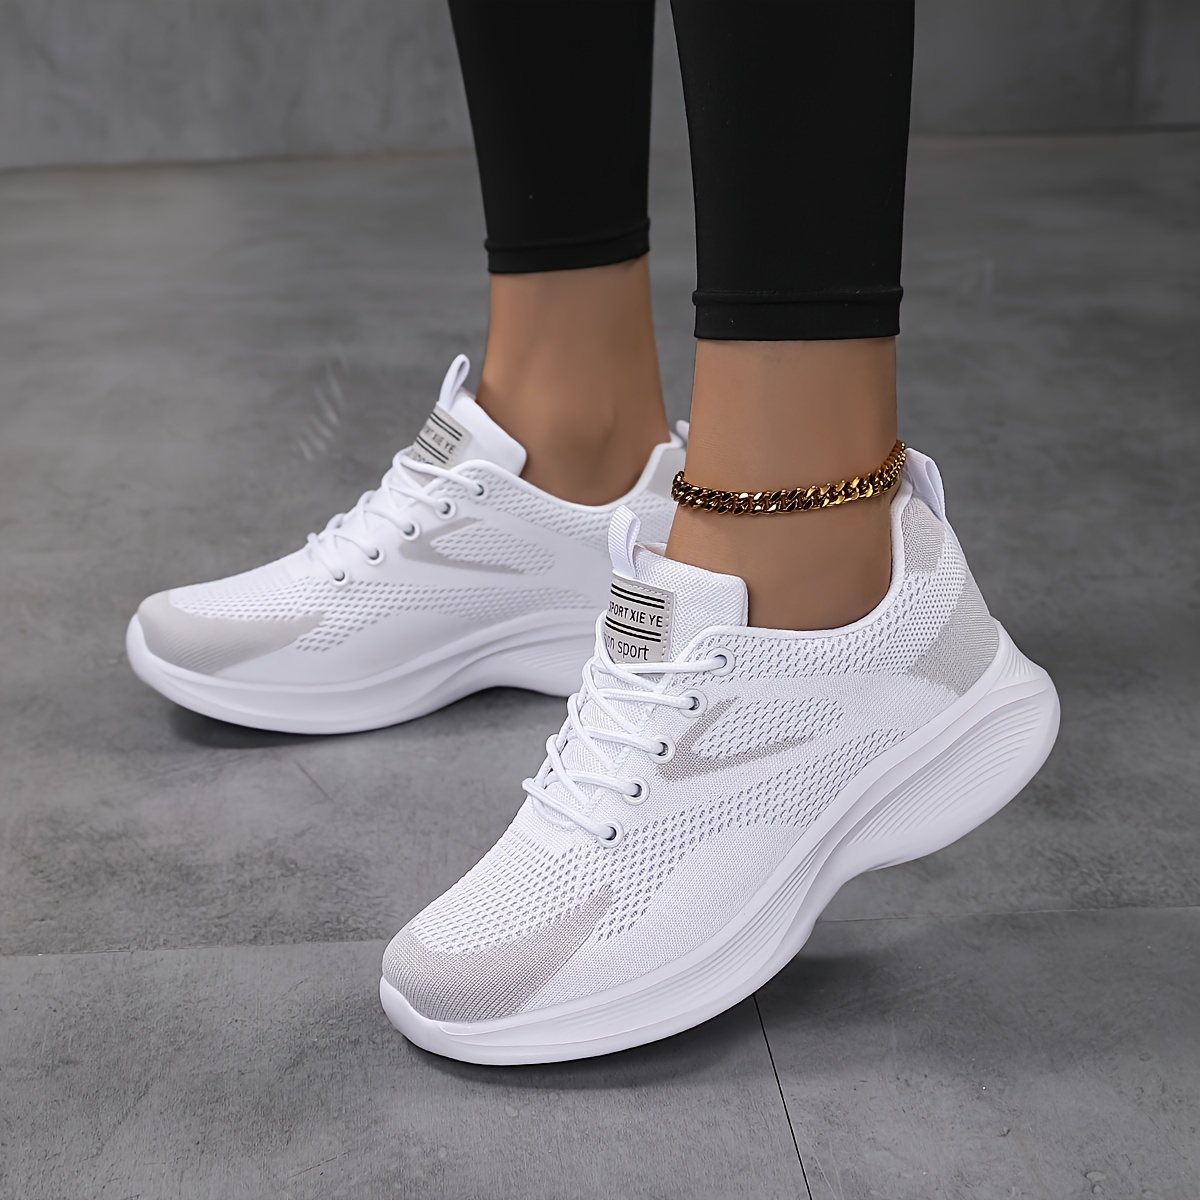 

Women's Mesh Breathable Casual Sneakers, Comfortable Lace Up Outdoor Shoes, Casual Low Top Running Shoes